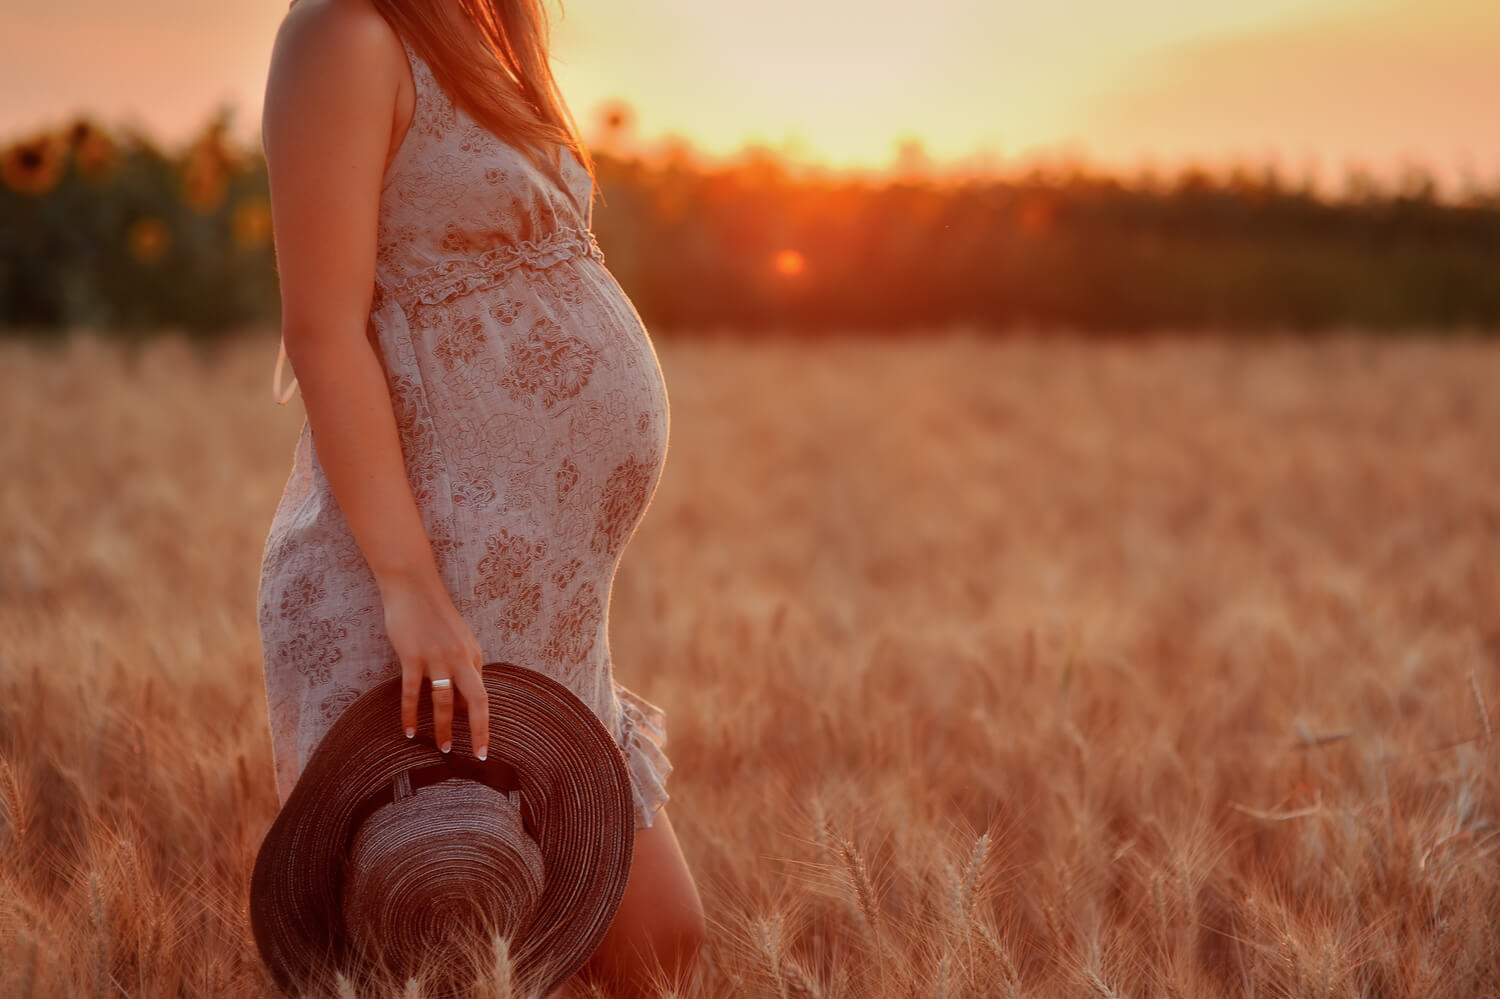 Risks Of Getting Pregnant At Or After The Age of 35